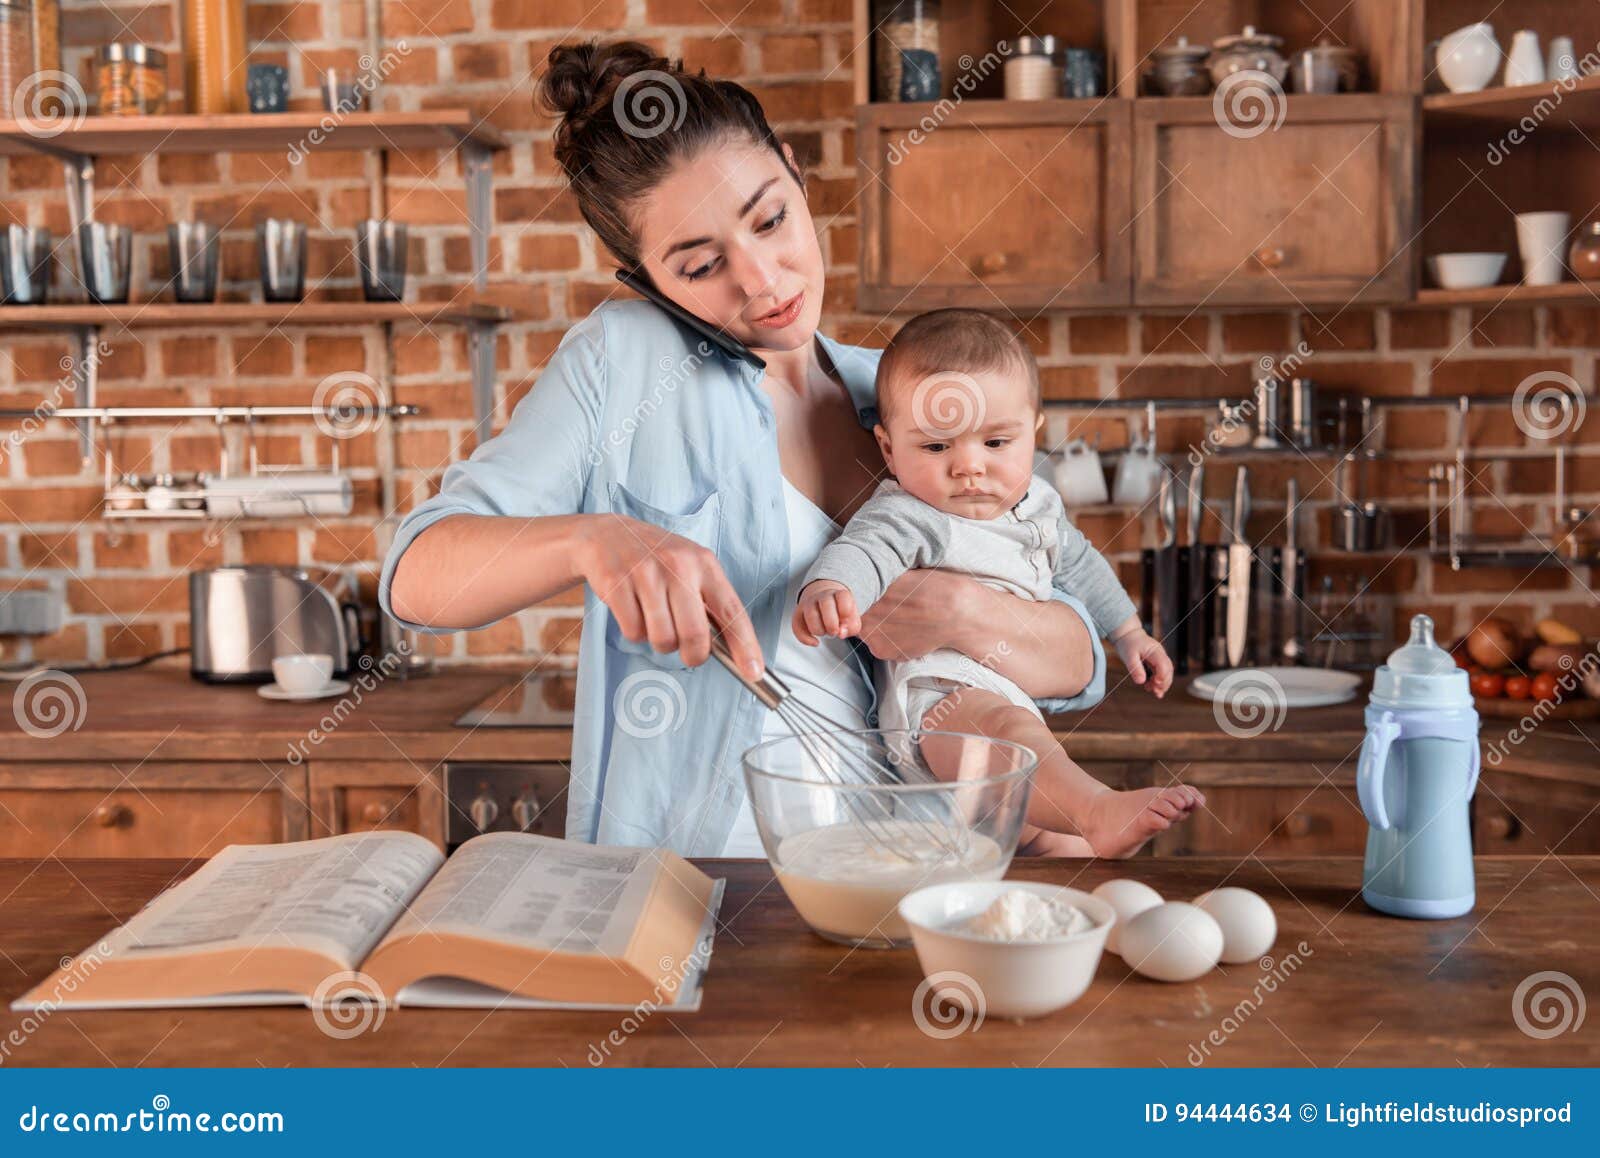 mother holding her son, talking on smartphone and mixing a dough at the kitchen. family life and multitasking concept